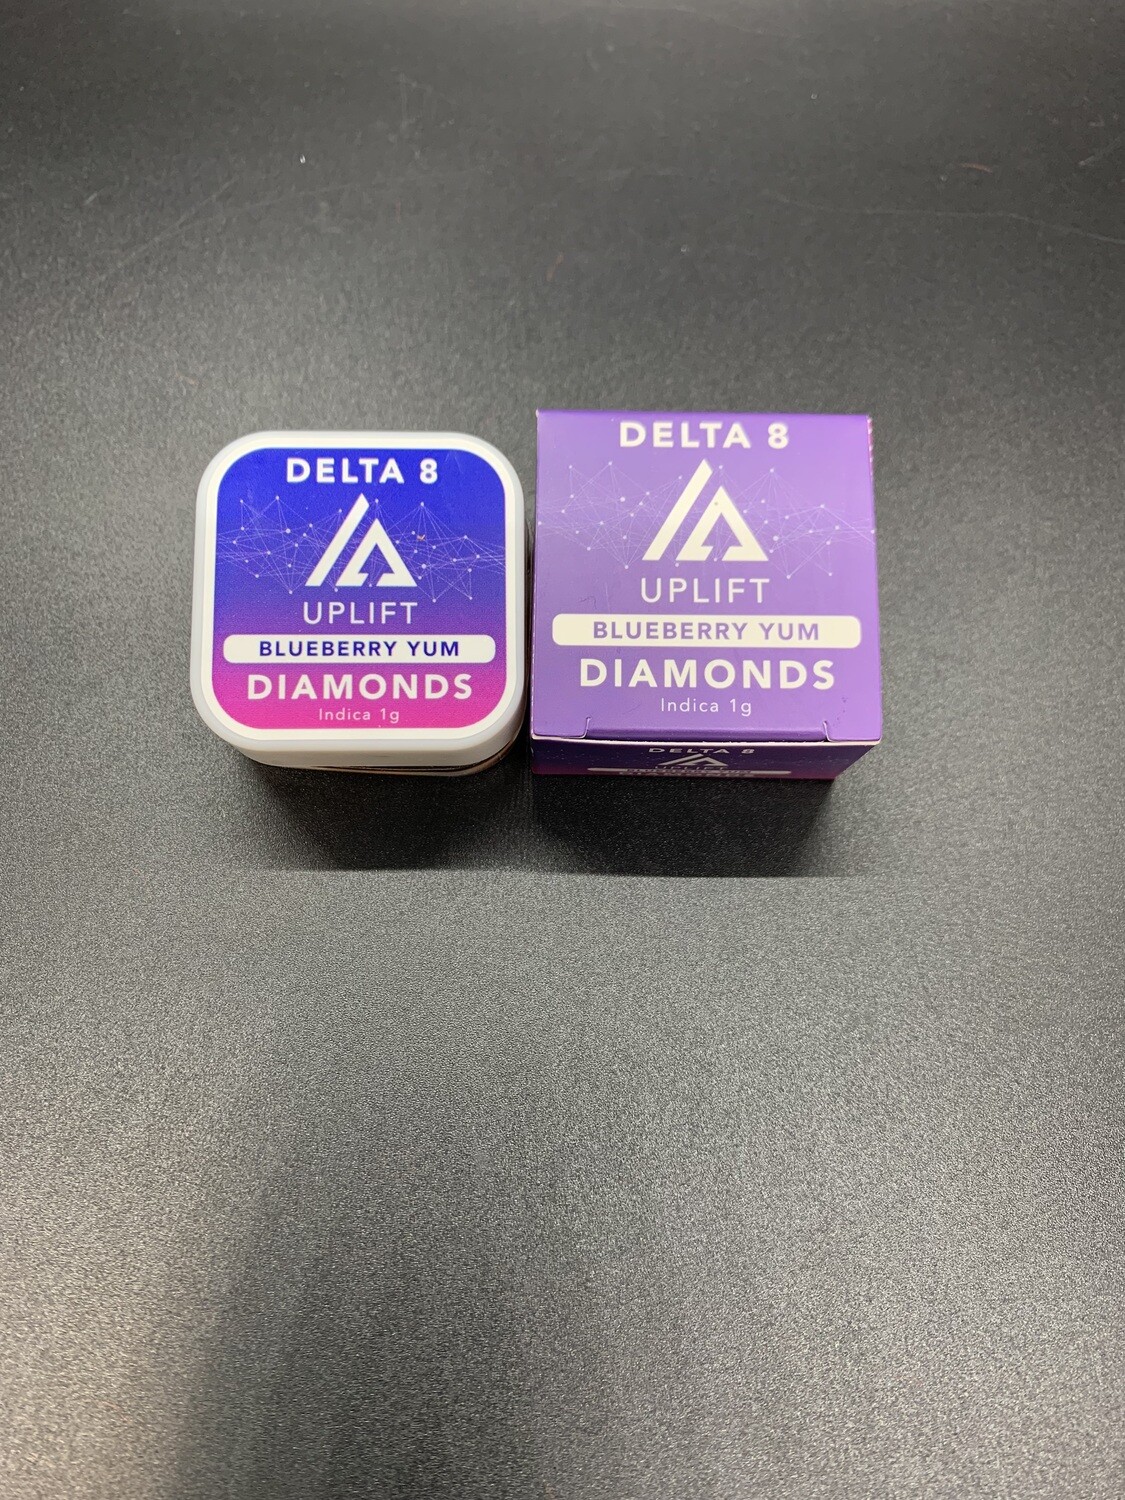 Uplift 1g Delta 8 Blueberry Yum Diamonds Concentrate